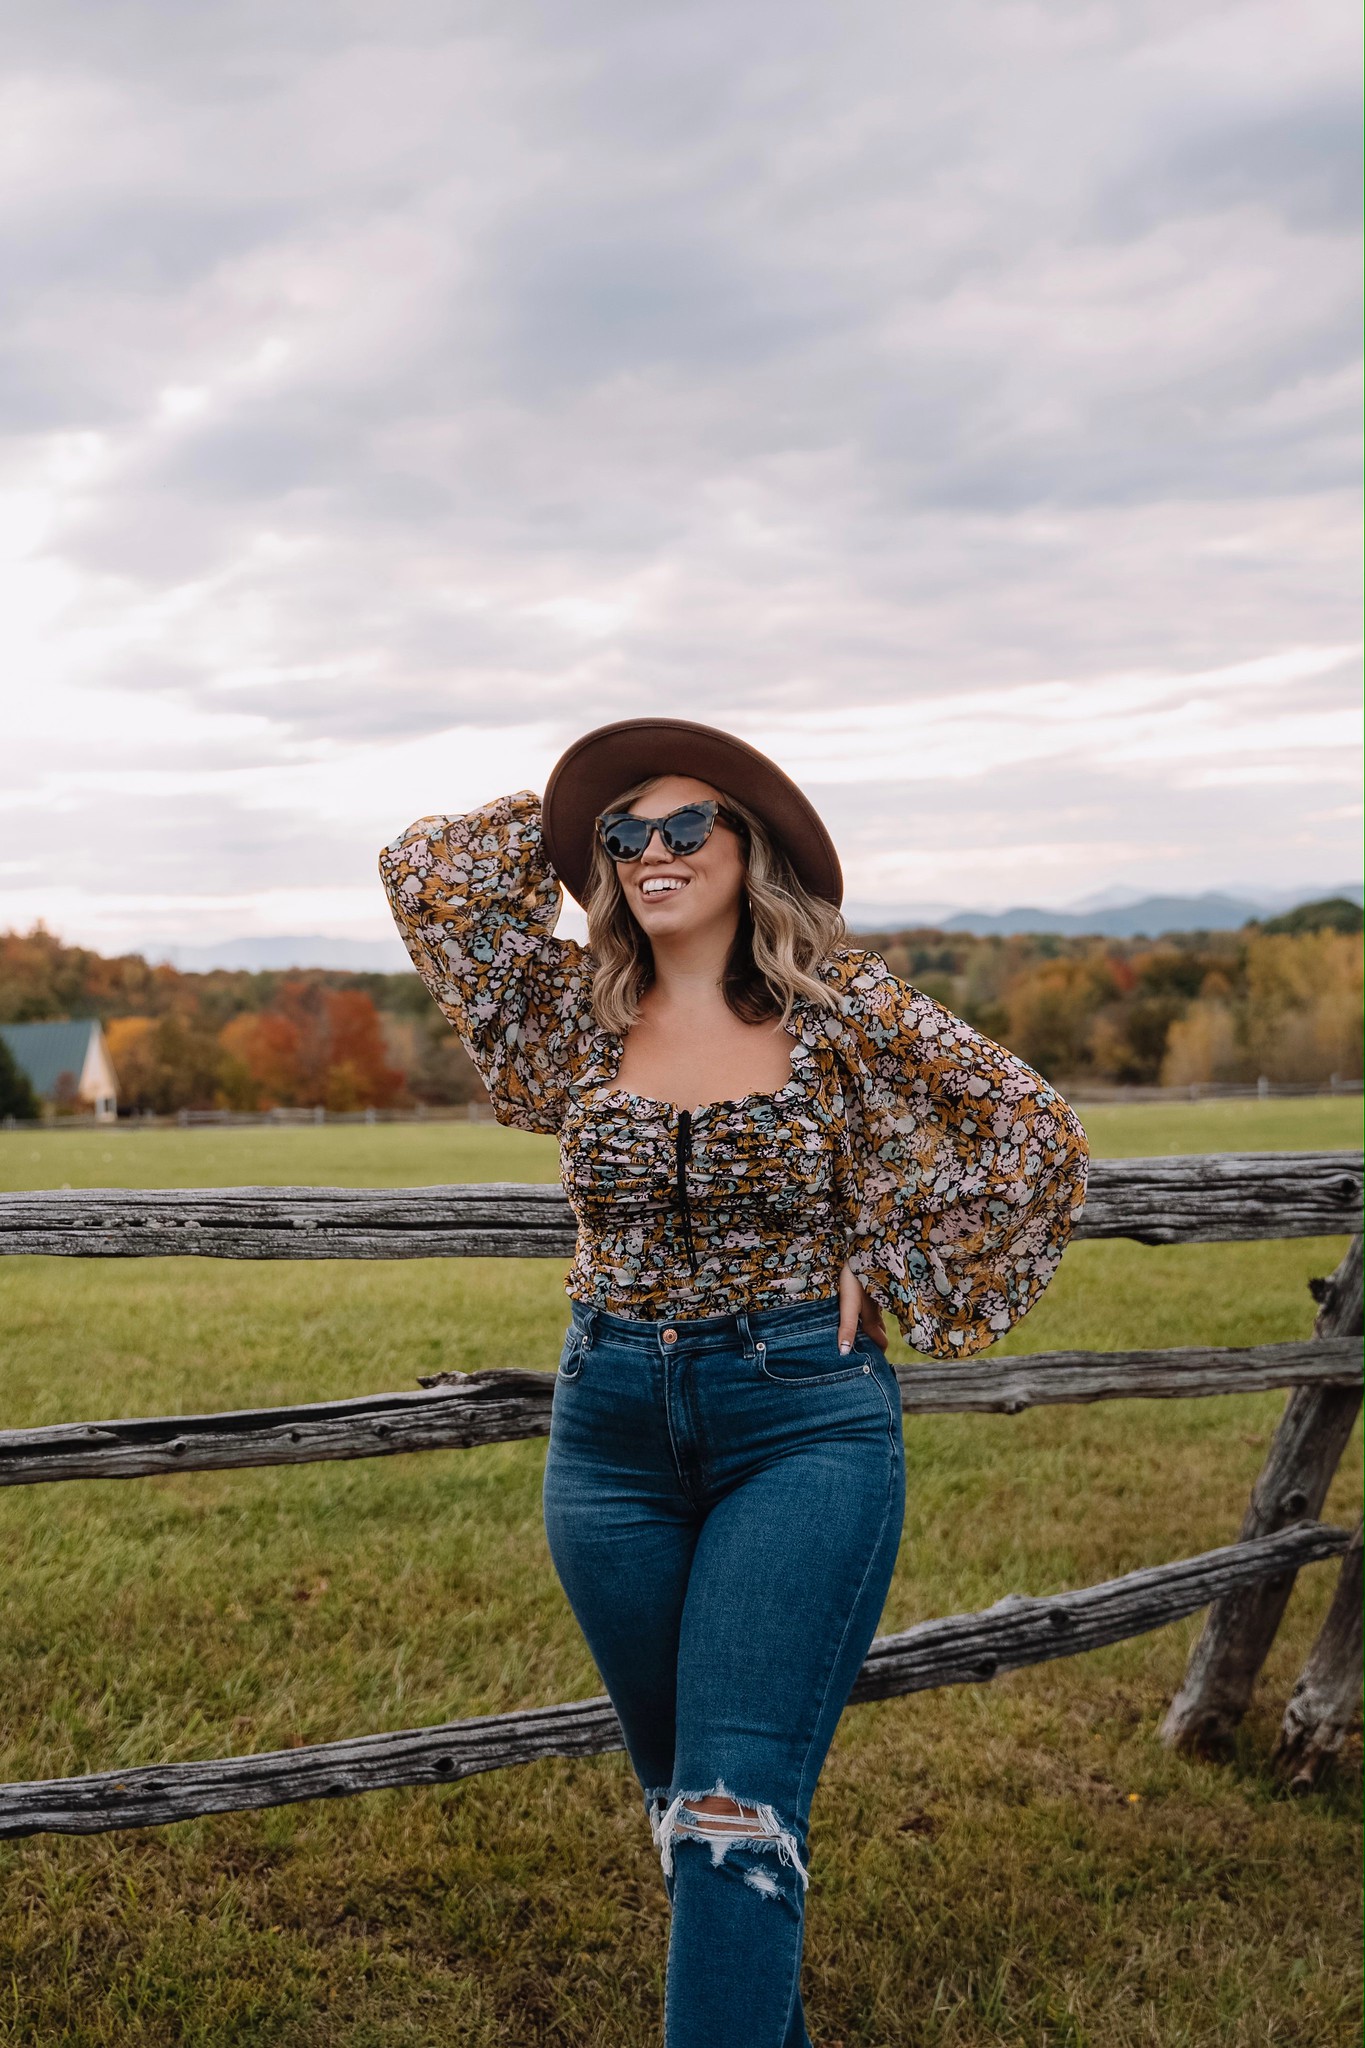 Free People Mabel Printed Blouse | Shelburne Vermont | What to Wear in Vermont in the Fall | Vermont Packing List for Fall | What to Wear in Vermont in October | What to Wear on a Fall Vacation | Fall Outfits